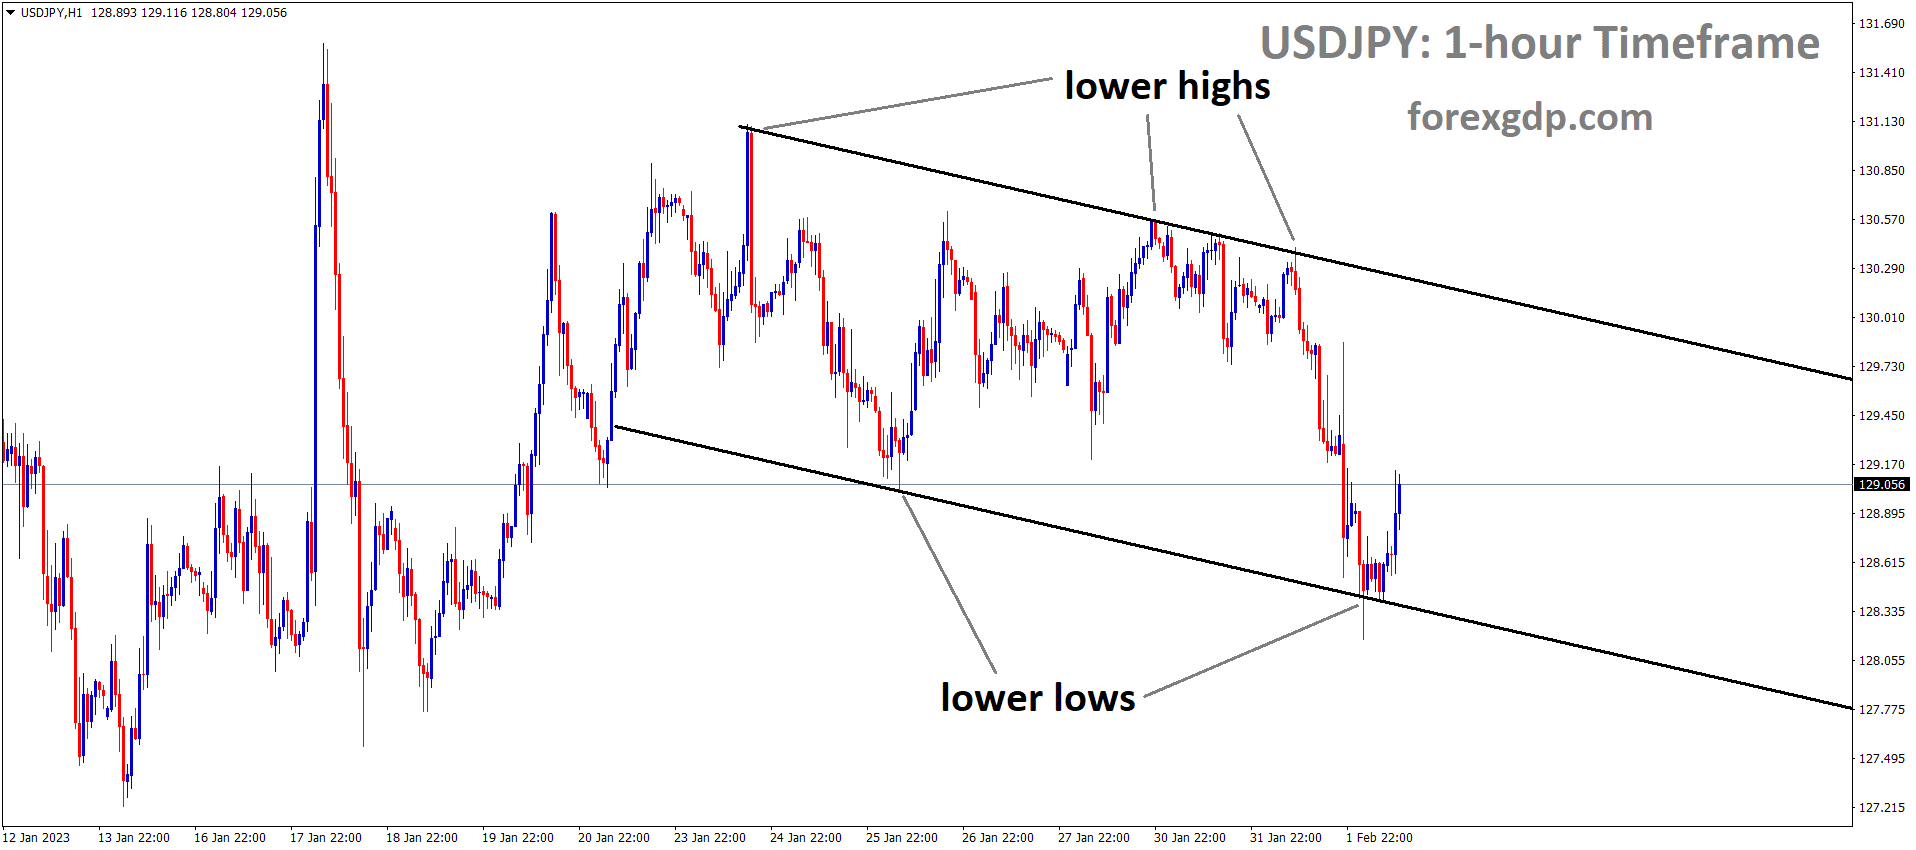 USDJPY is moving in the Descending channel and the market has rebounded from the lower low area of the channel